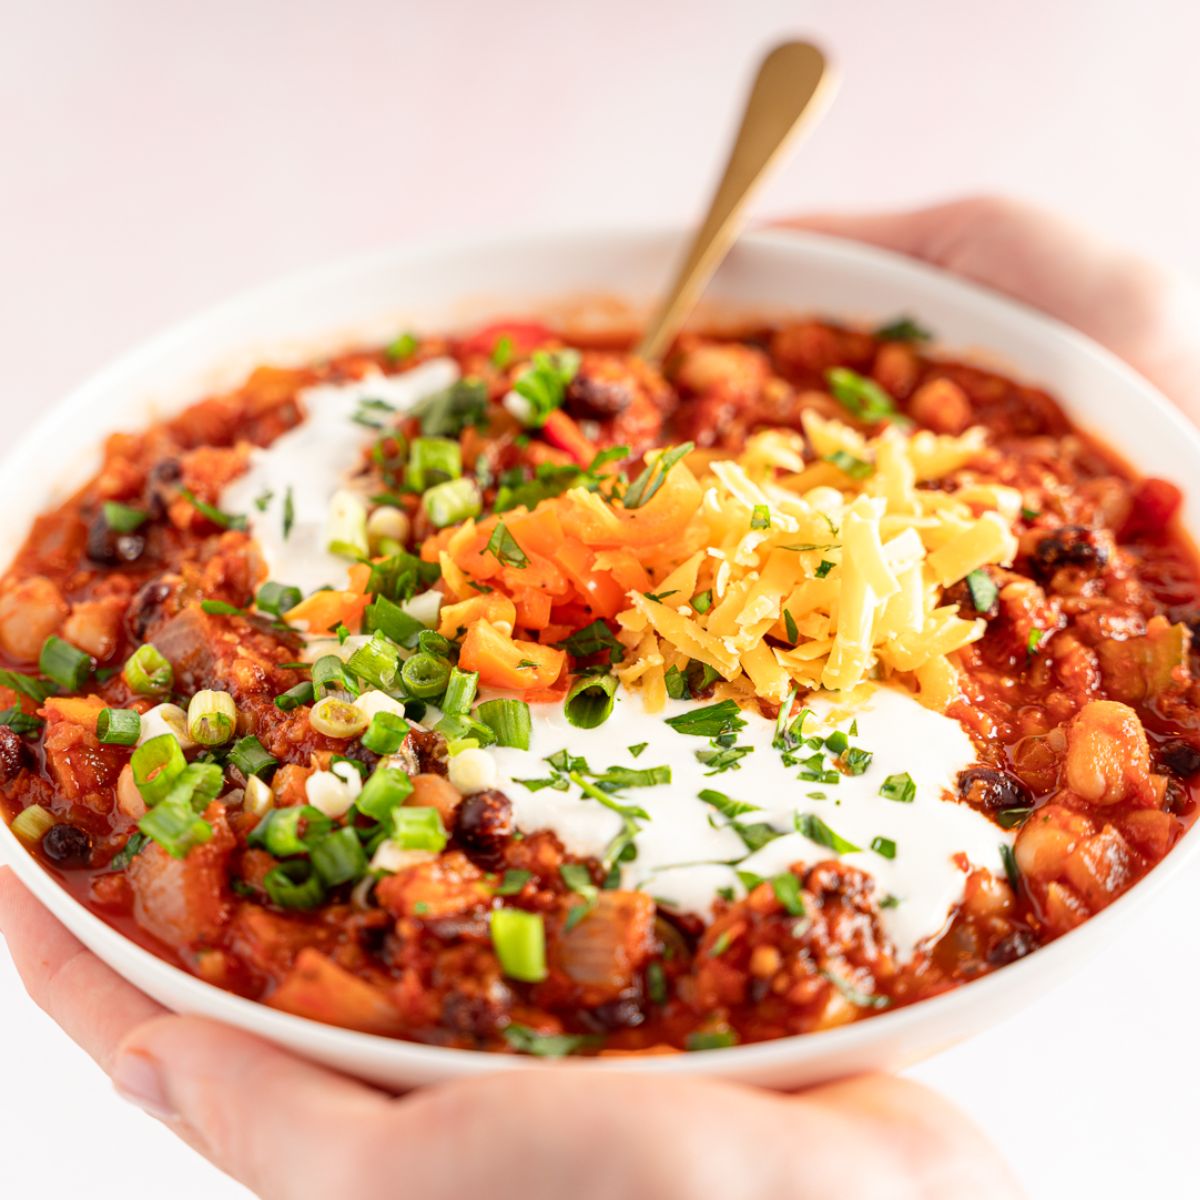 A big bowl of Vegan Vegetable Chili enclosed in two hands in a white bowl.